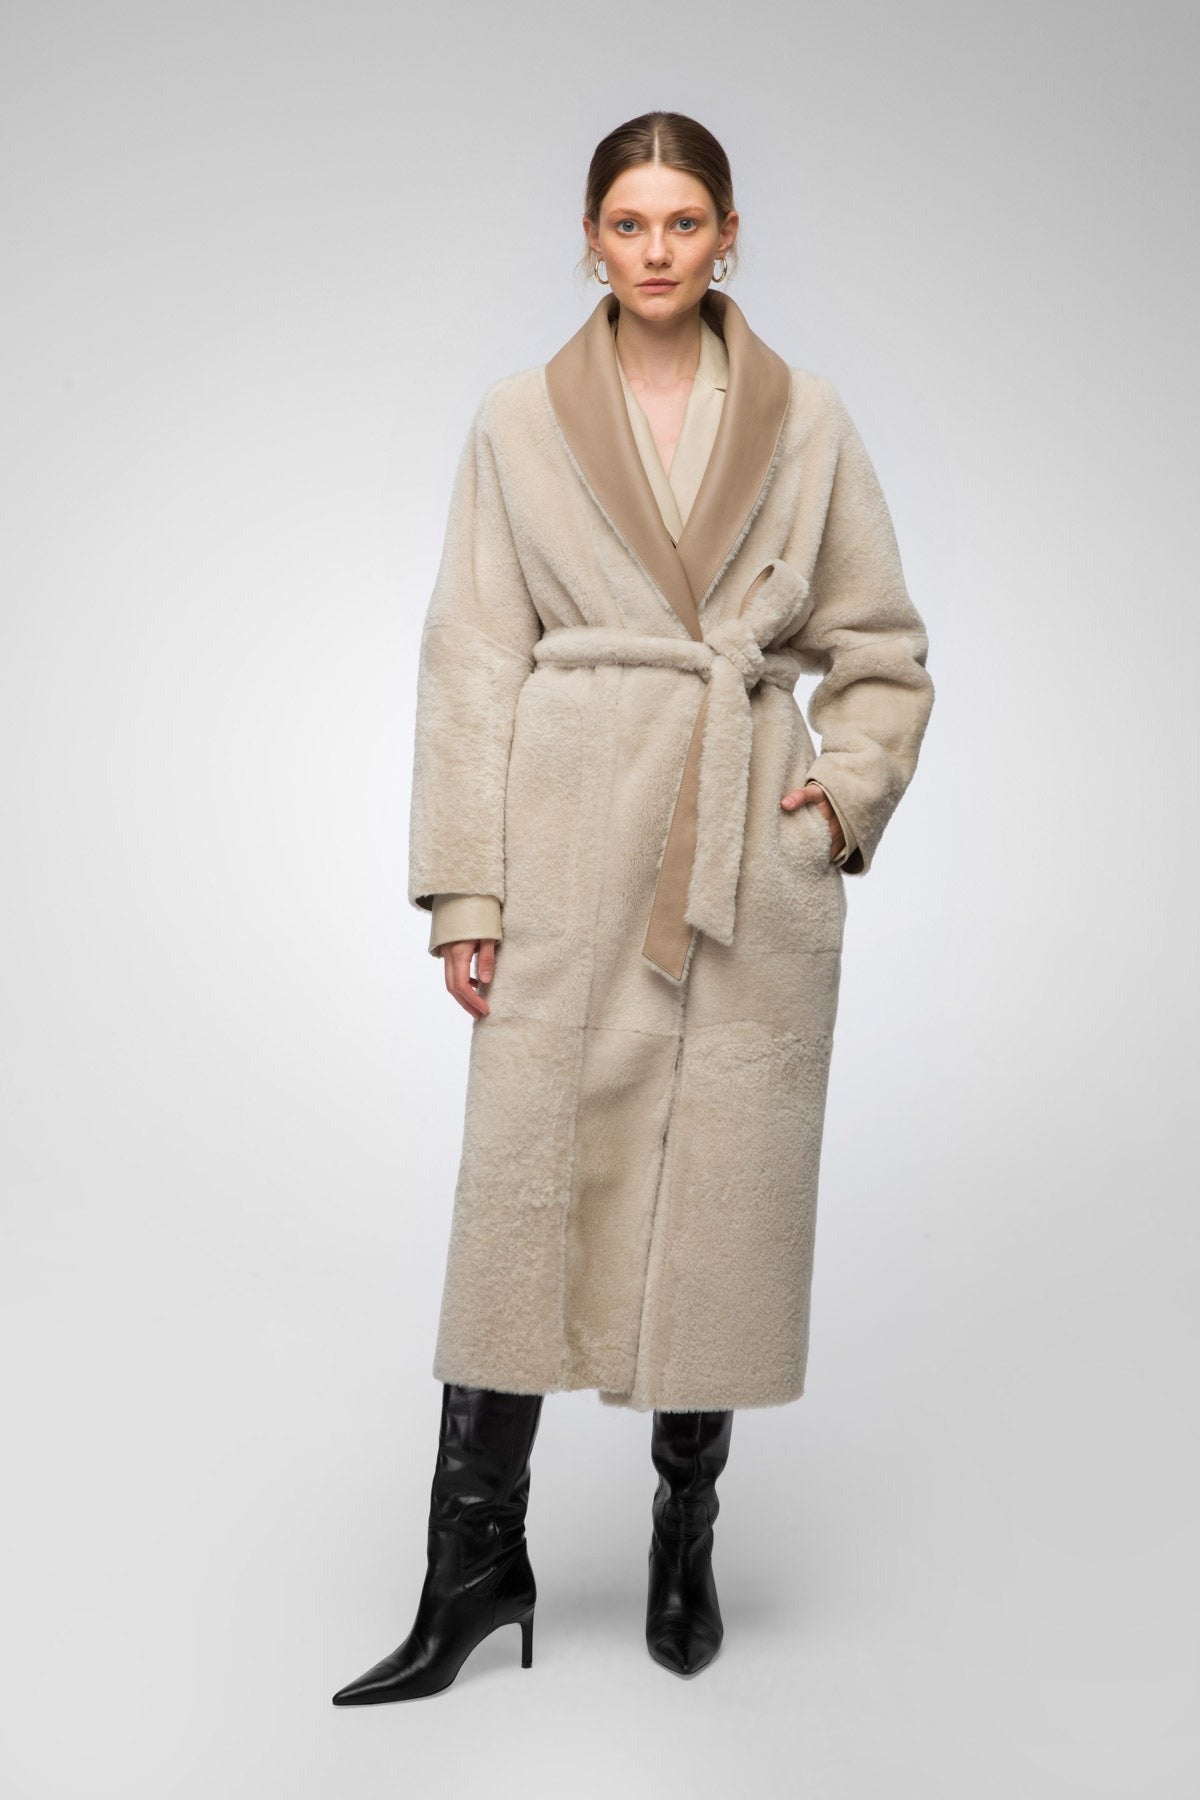 Women's Double Sided Shearling Leather Coat In Tan Brown